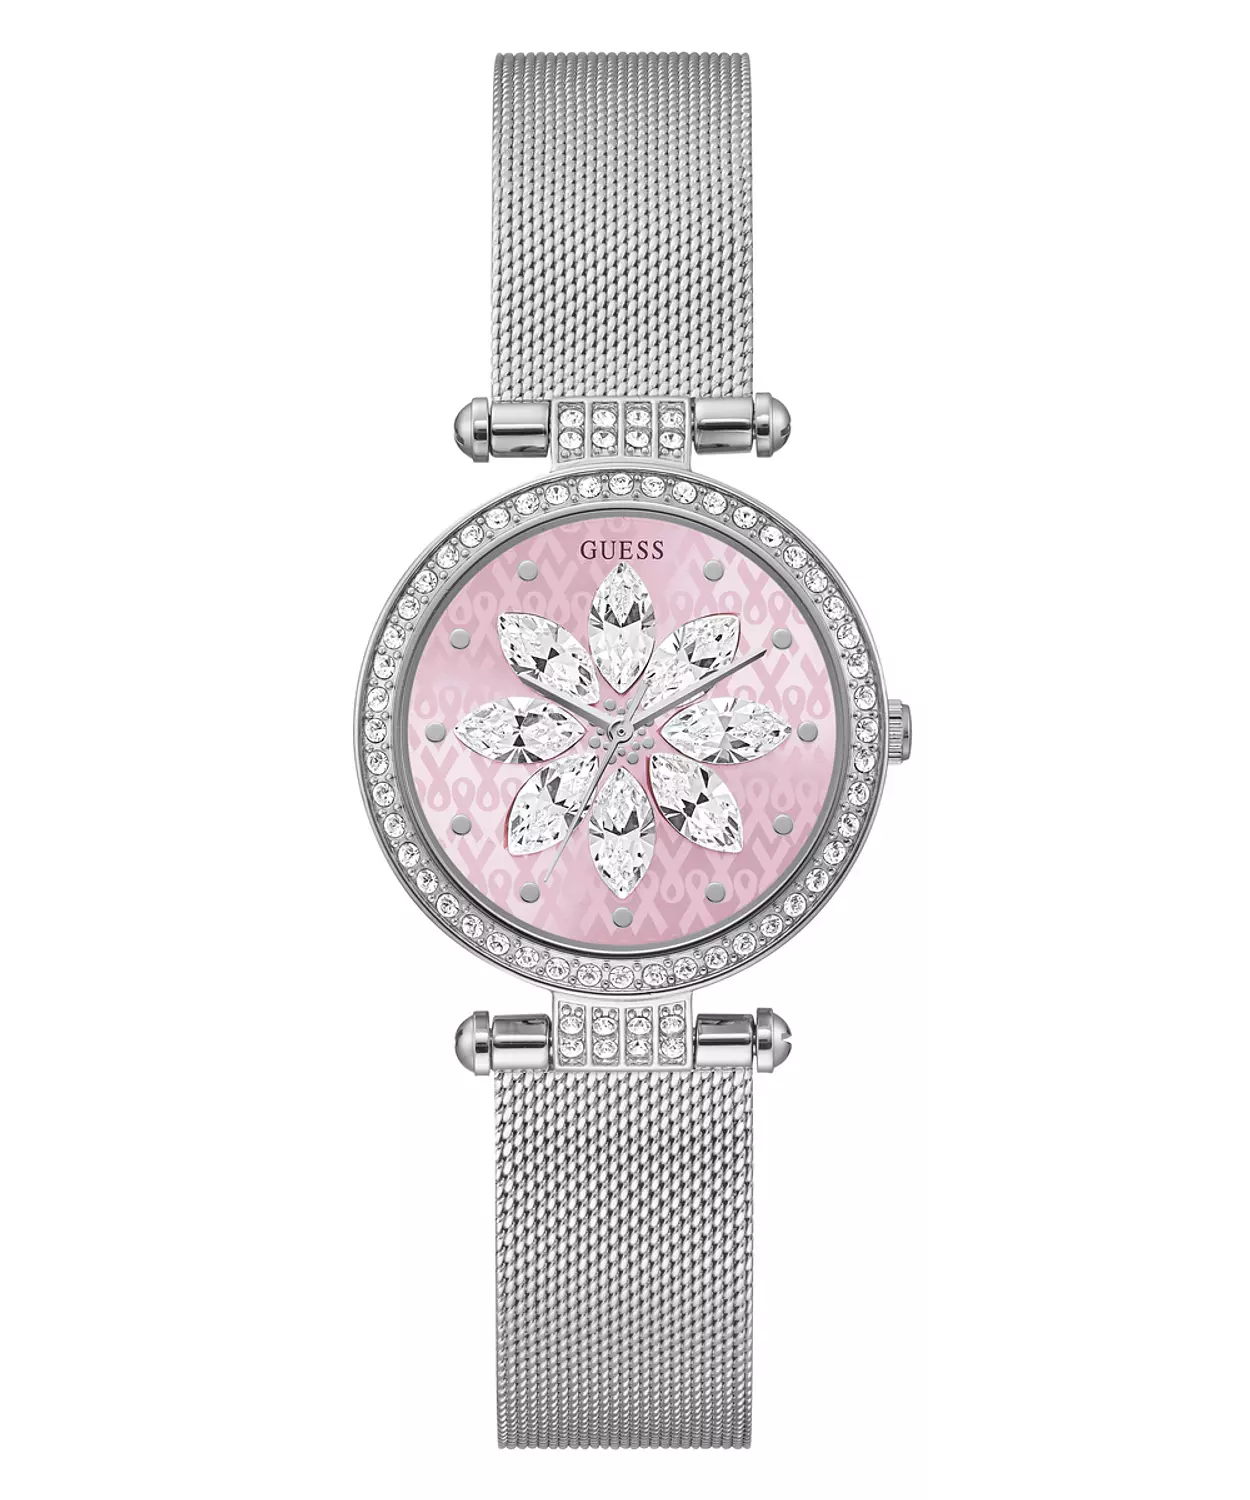 GUESS GW0032L3 ANALOG WATCH For Women Round Shape Silver Stainless Steel/Mesh Polished Bracelet 0